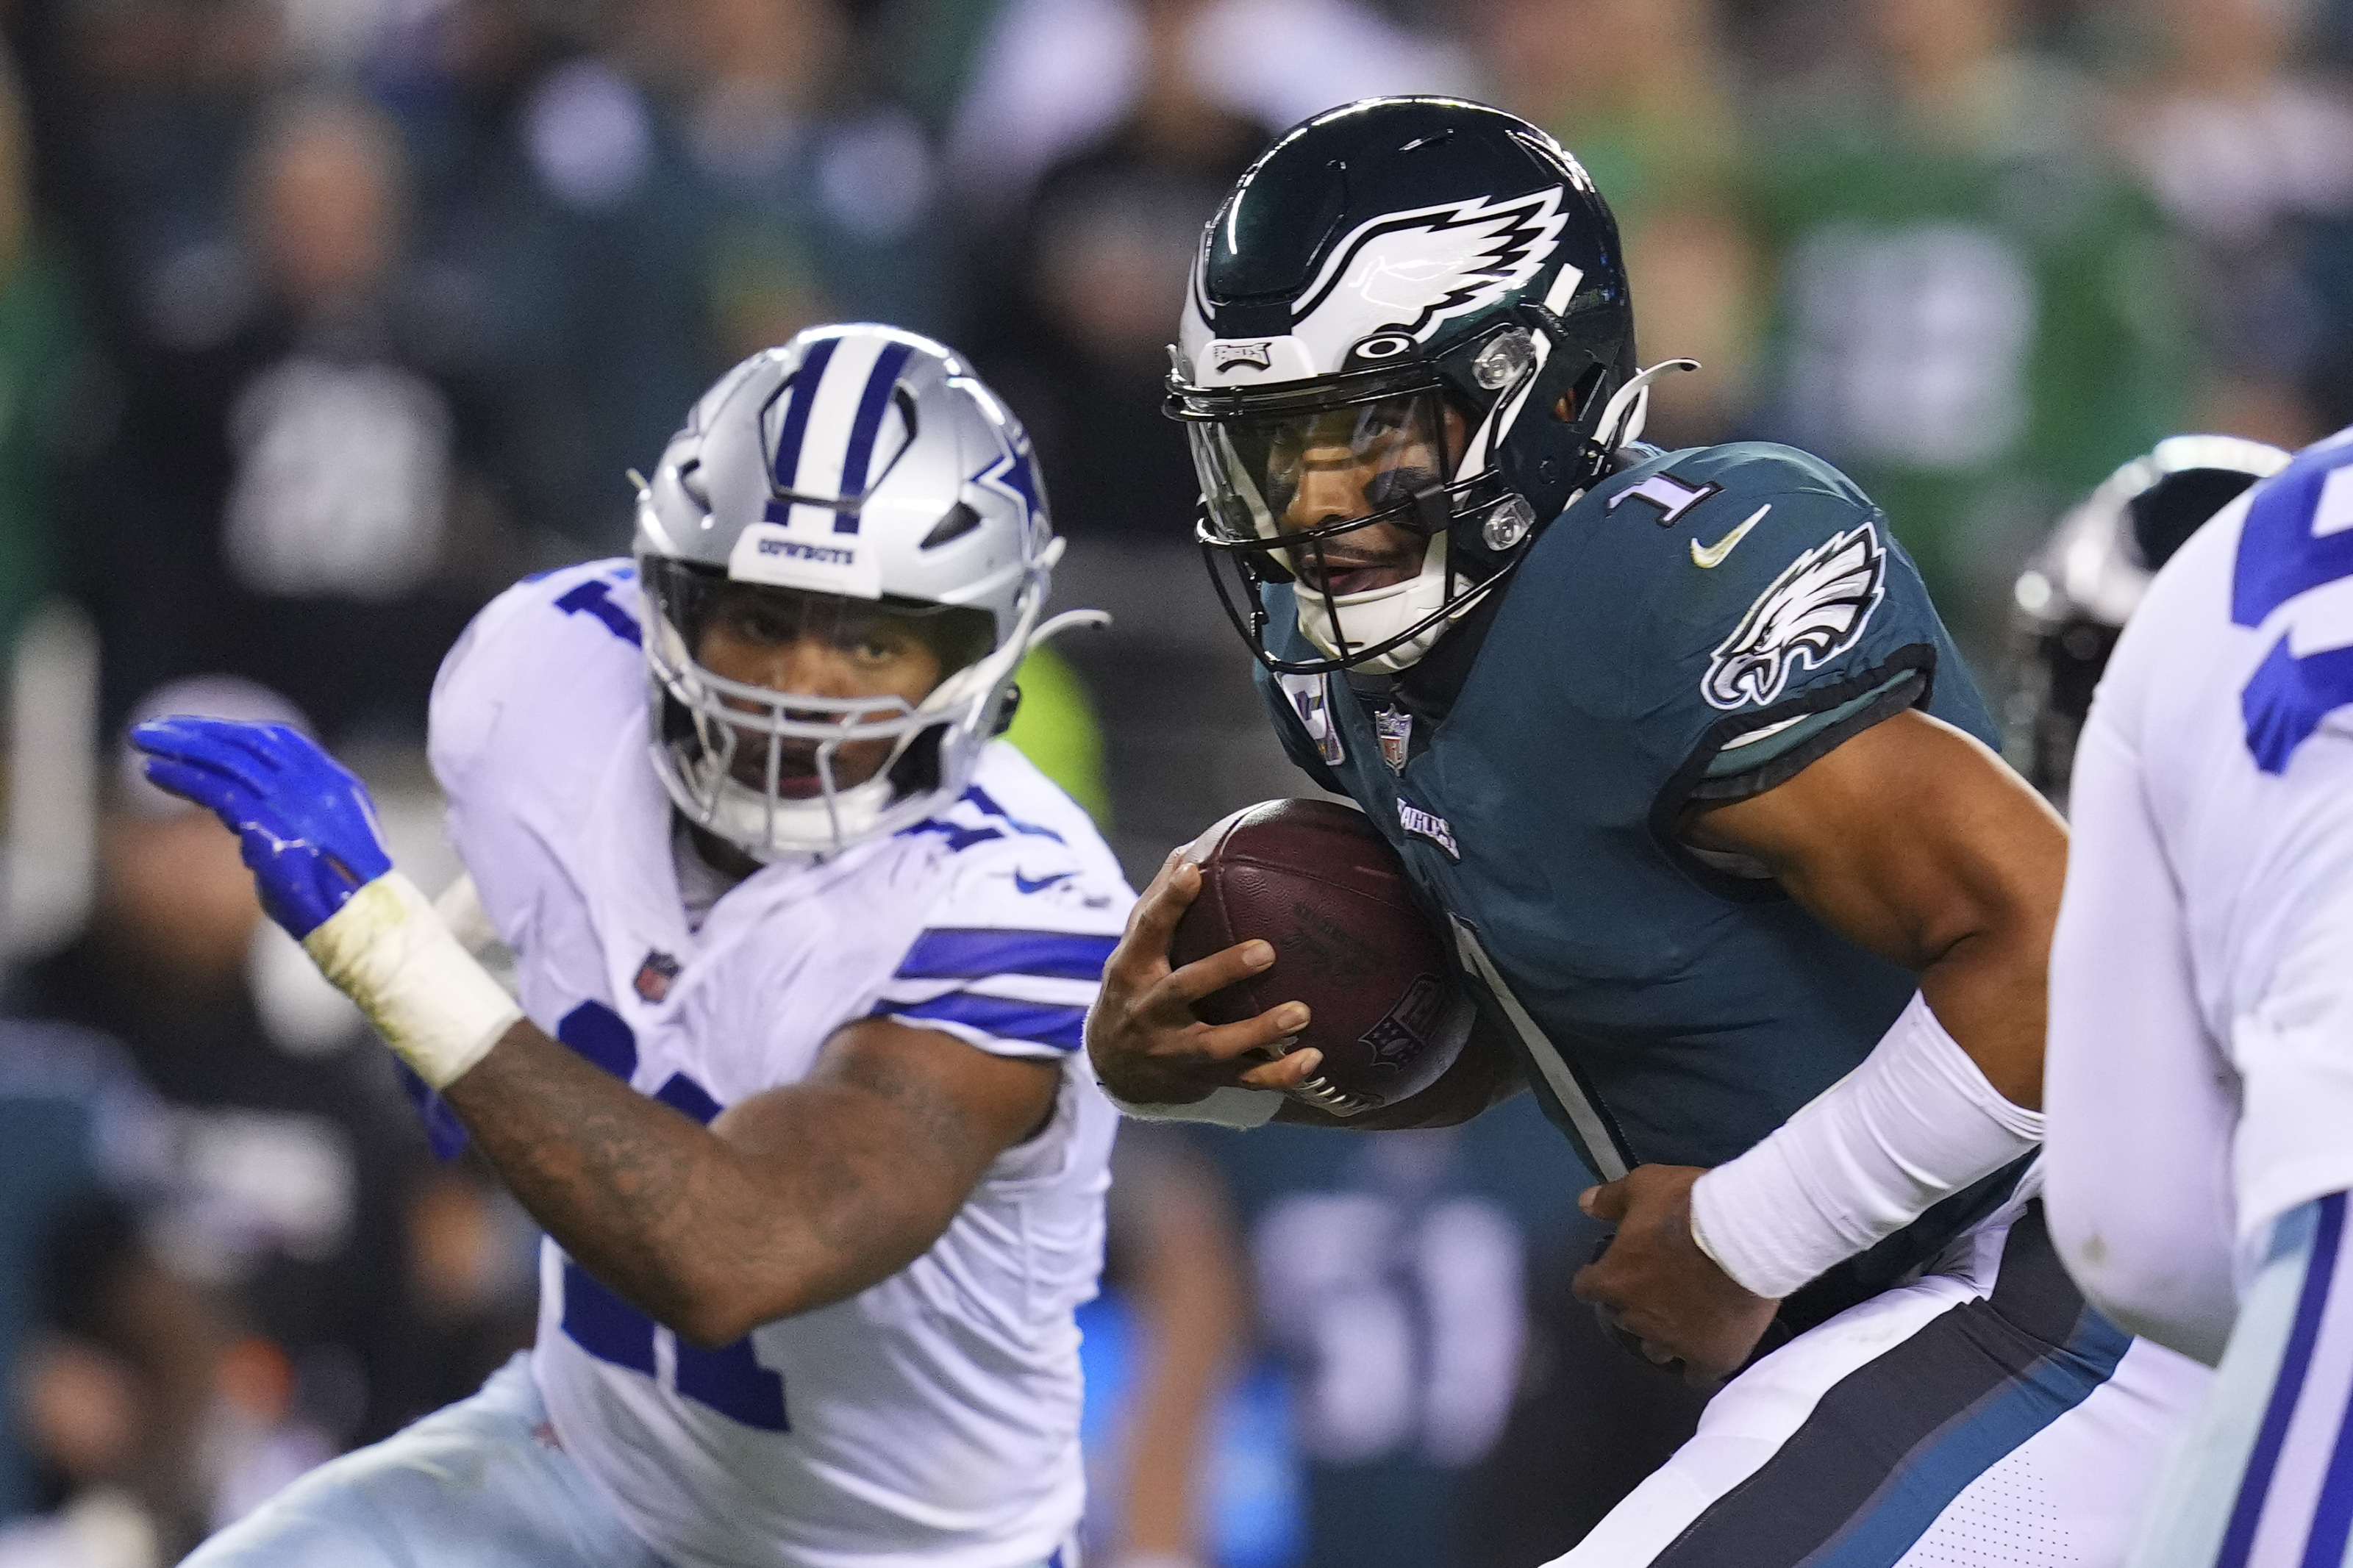 NFC East Week 1 predictions: Main reason each team will win or lose